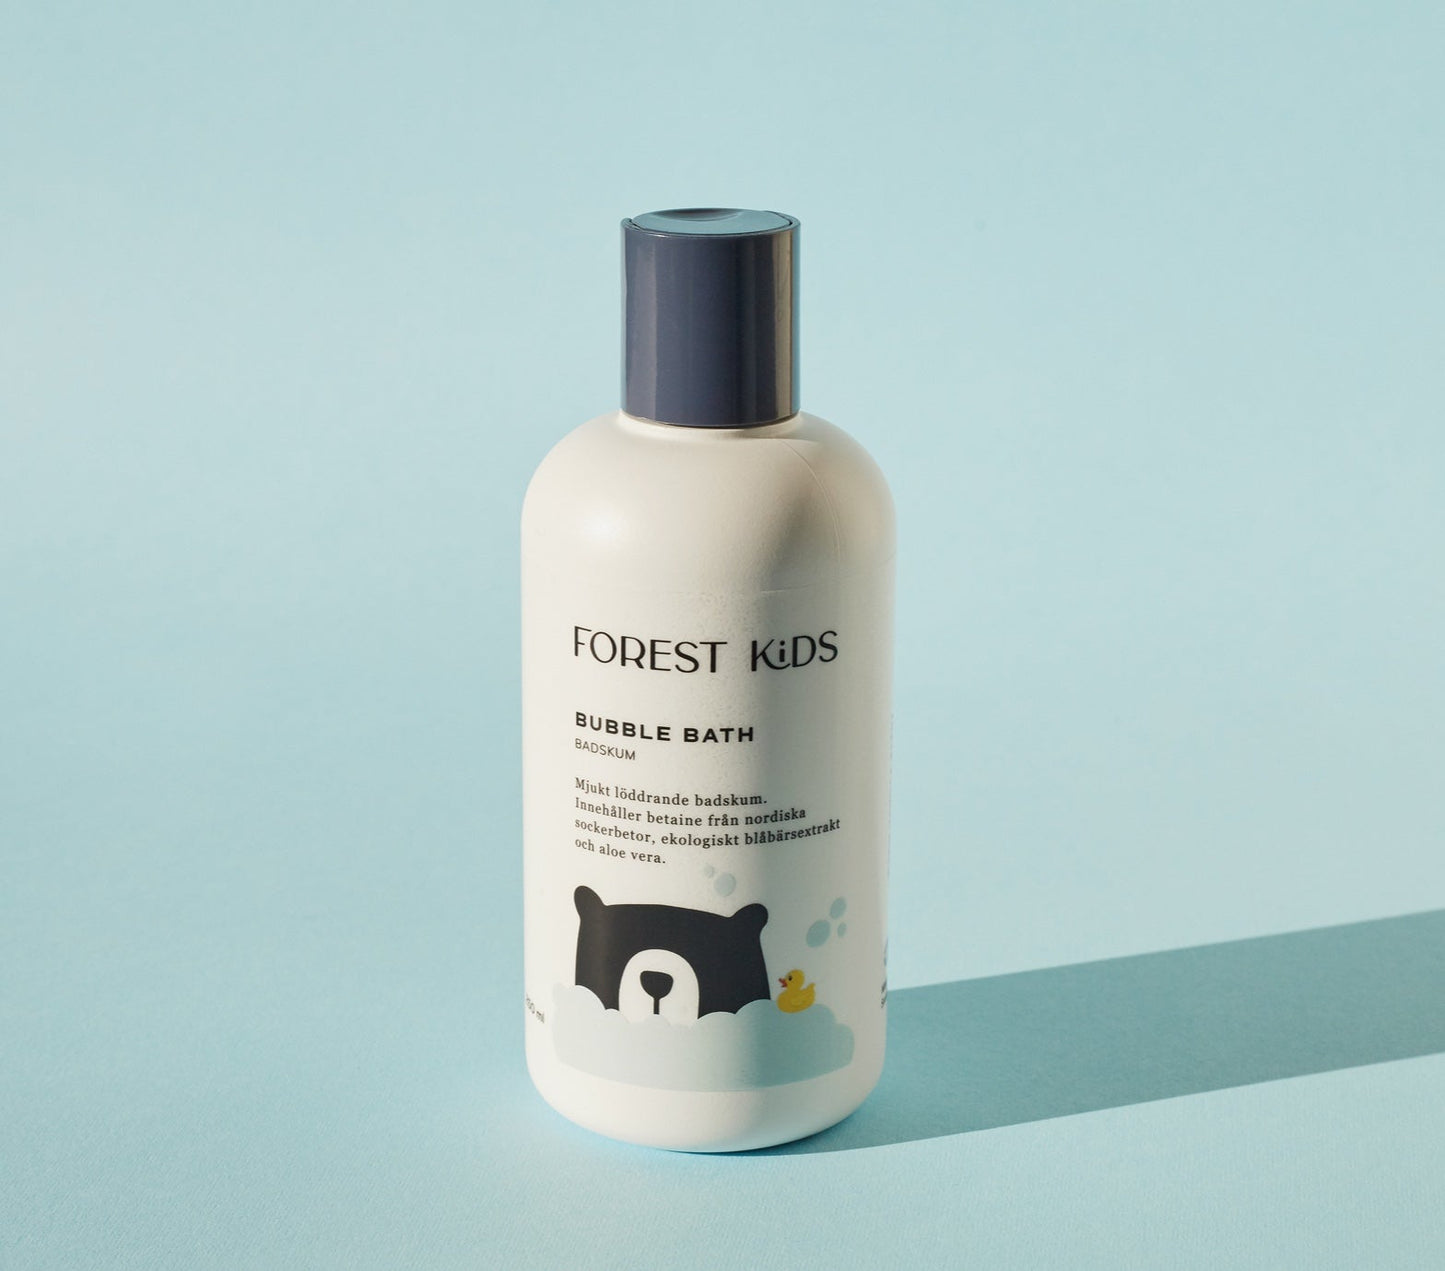 Forest Kids soft foaming bubble bath. With a generous foam and a mild scent your bath will be a relaxing and fun time for the family